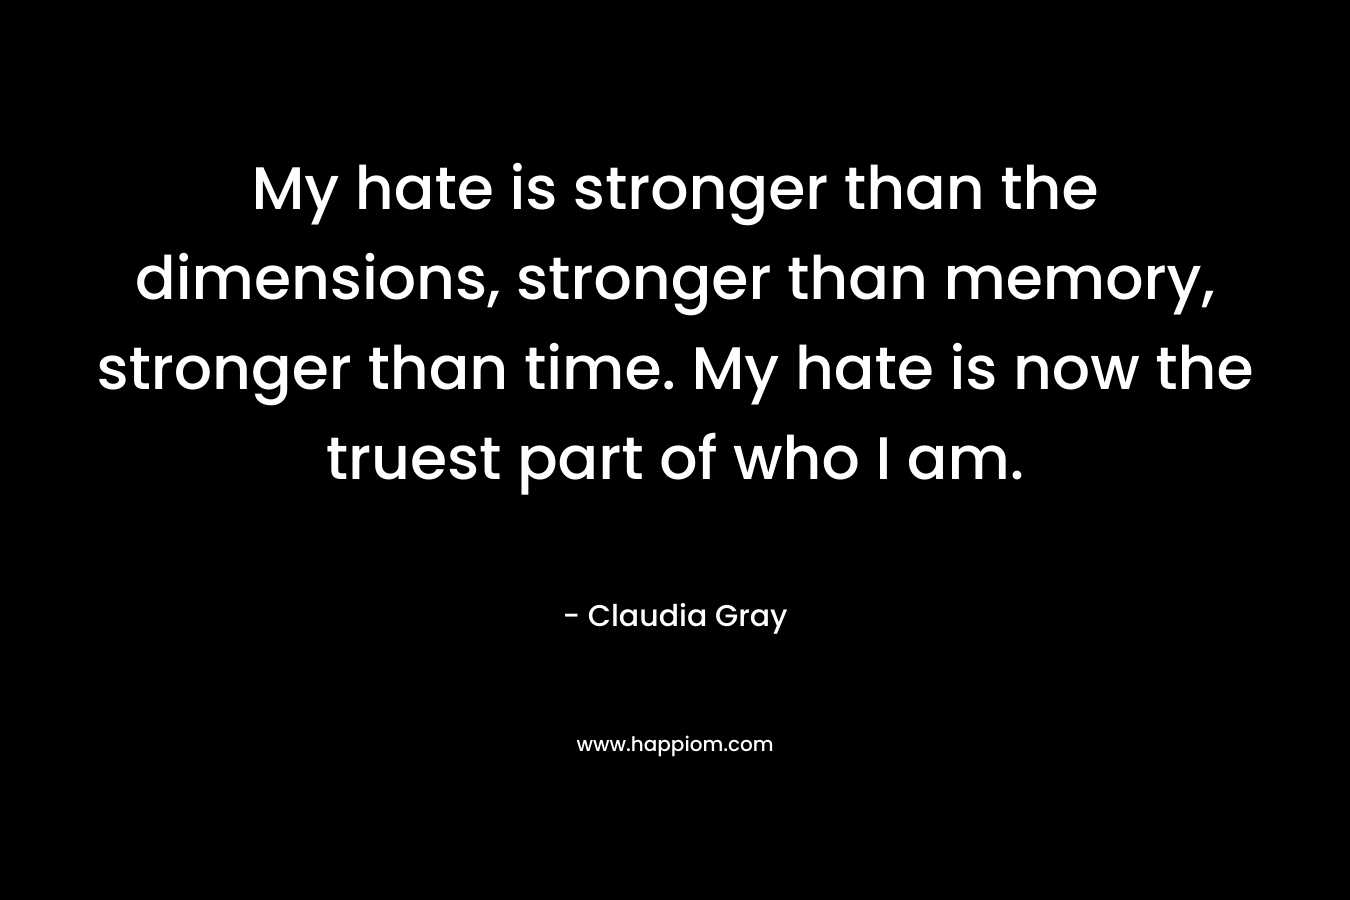 My hate is stronger than the dimensions, stronger than memory, stronger than time. My hate is now the truest part of who I am. – Claudia Gray